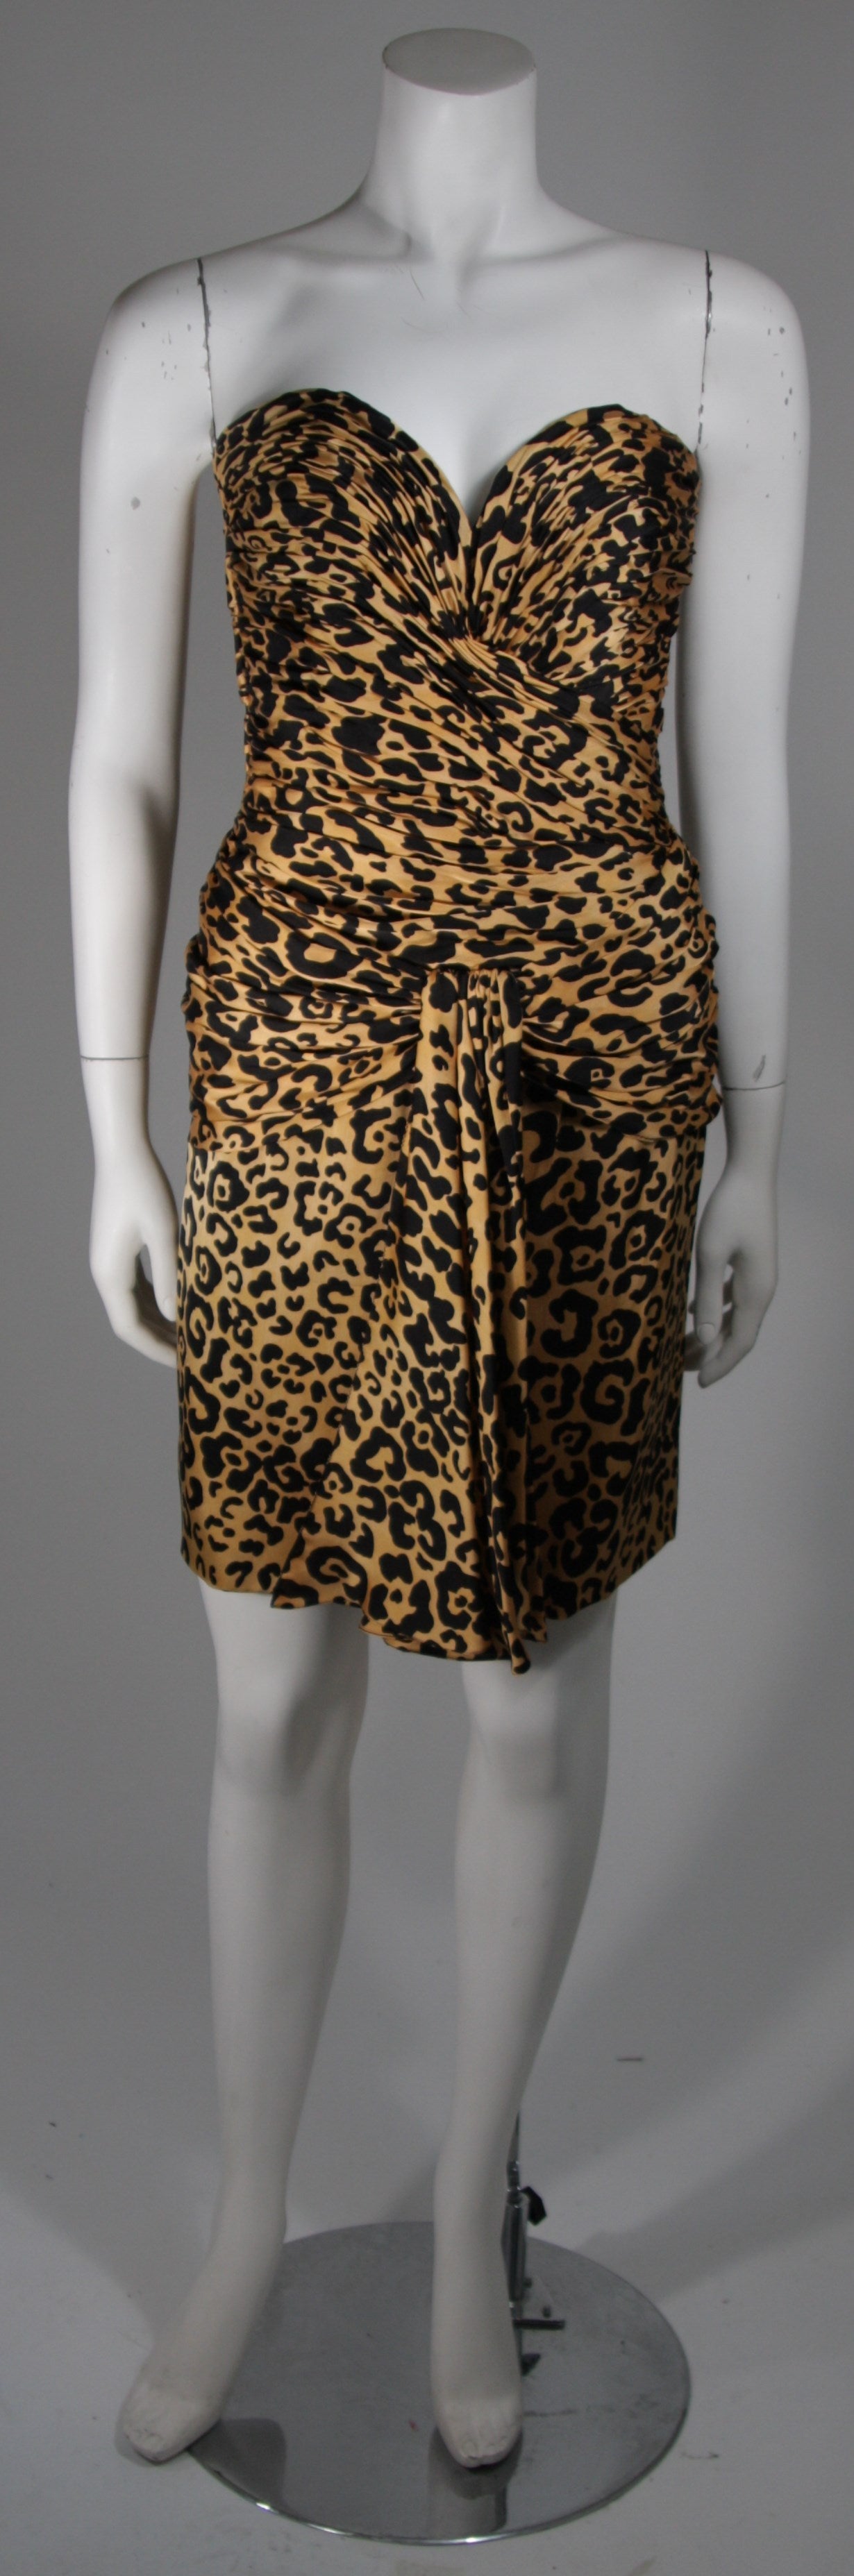 Black Vicky Tiel Silk Animal Print Bustier Dress with Capelet Size Small